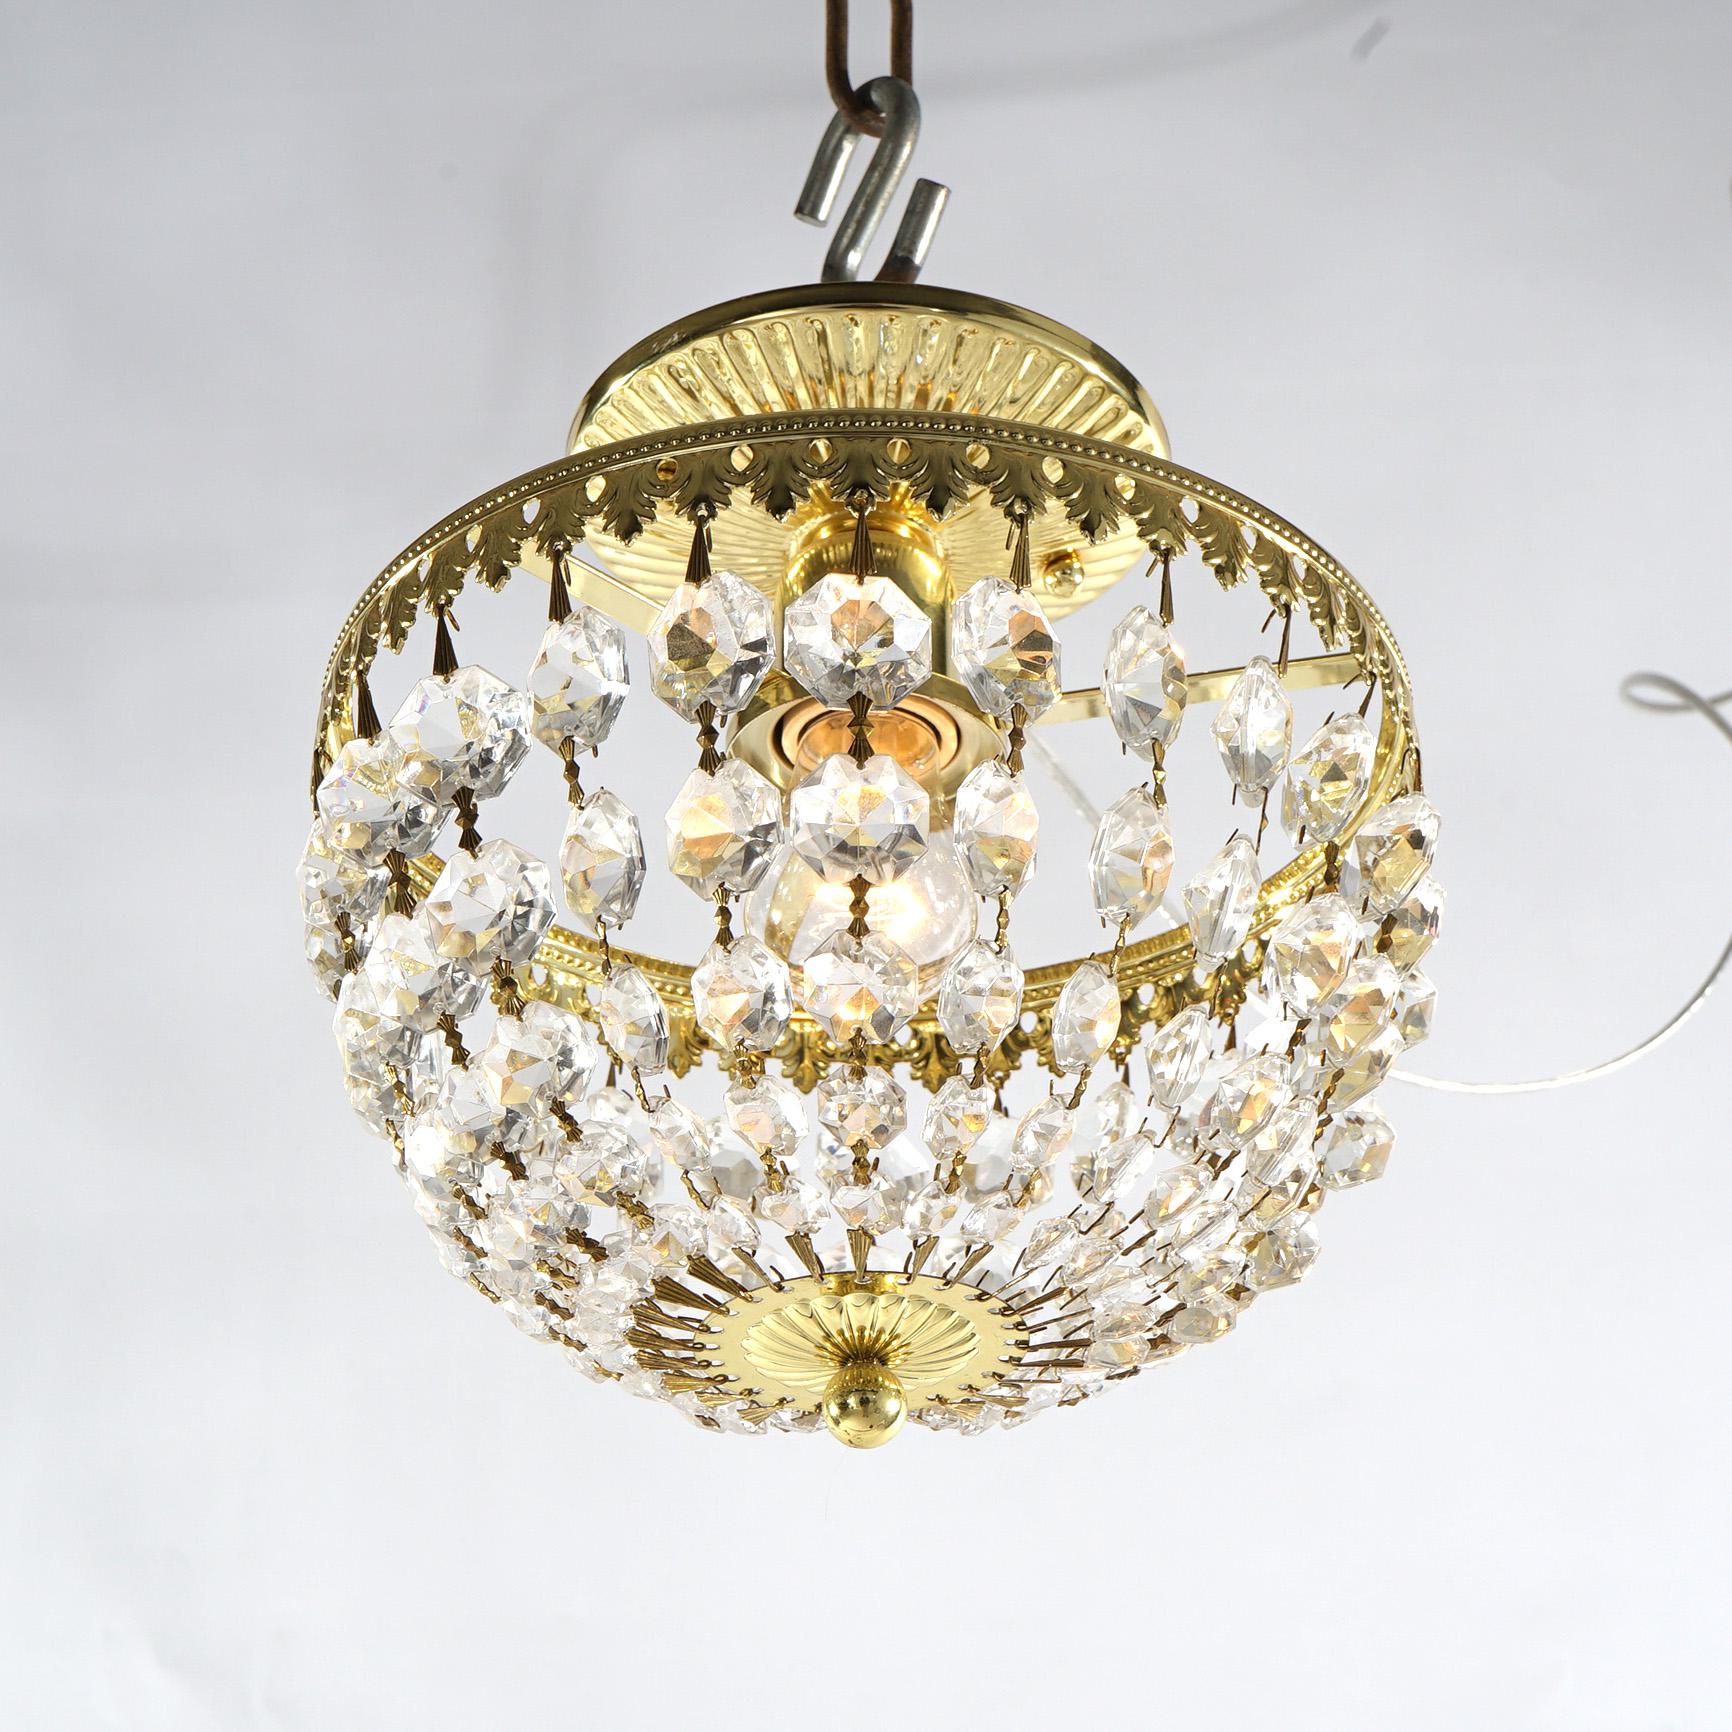 Petite Gilt Metal & Crystal Ceiling Light Fixture 20th C In Good Condition For Sale In Big Flats, NY